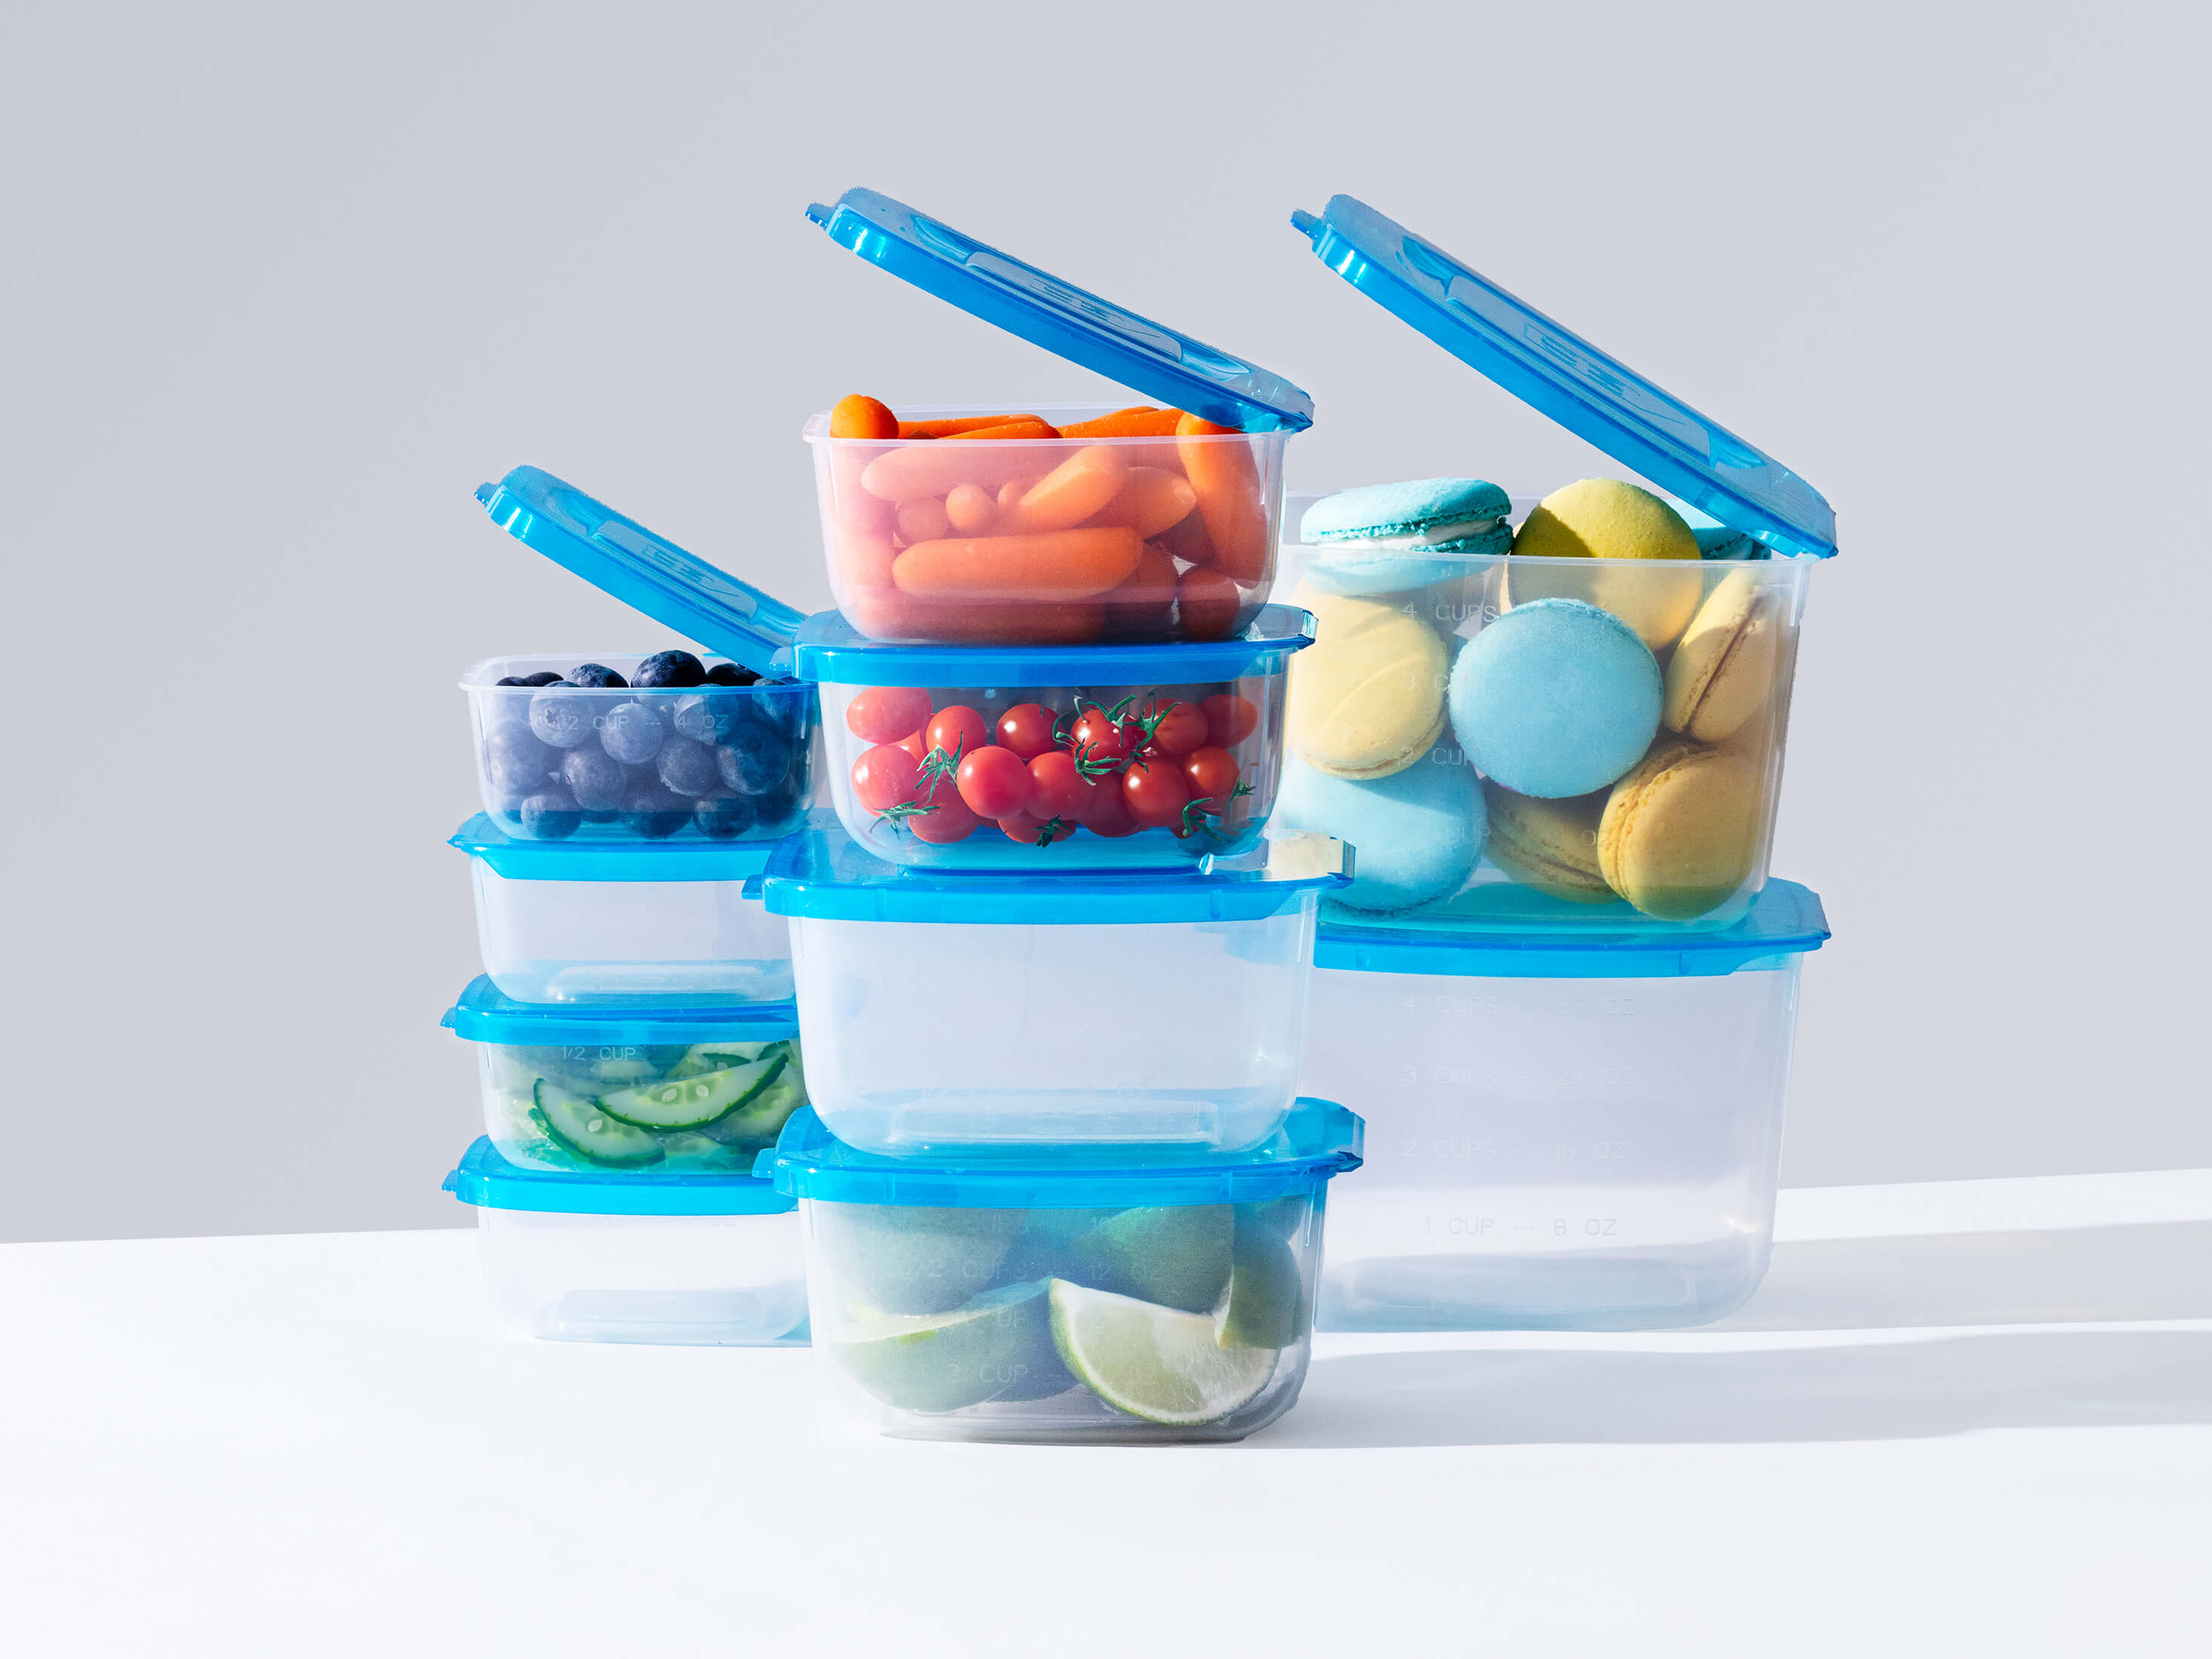 MR. LID 10 PACK of CONTAINERS – Mr. Lid